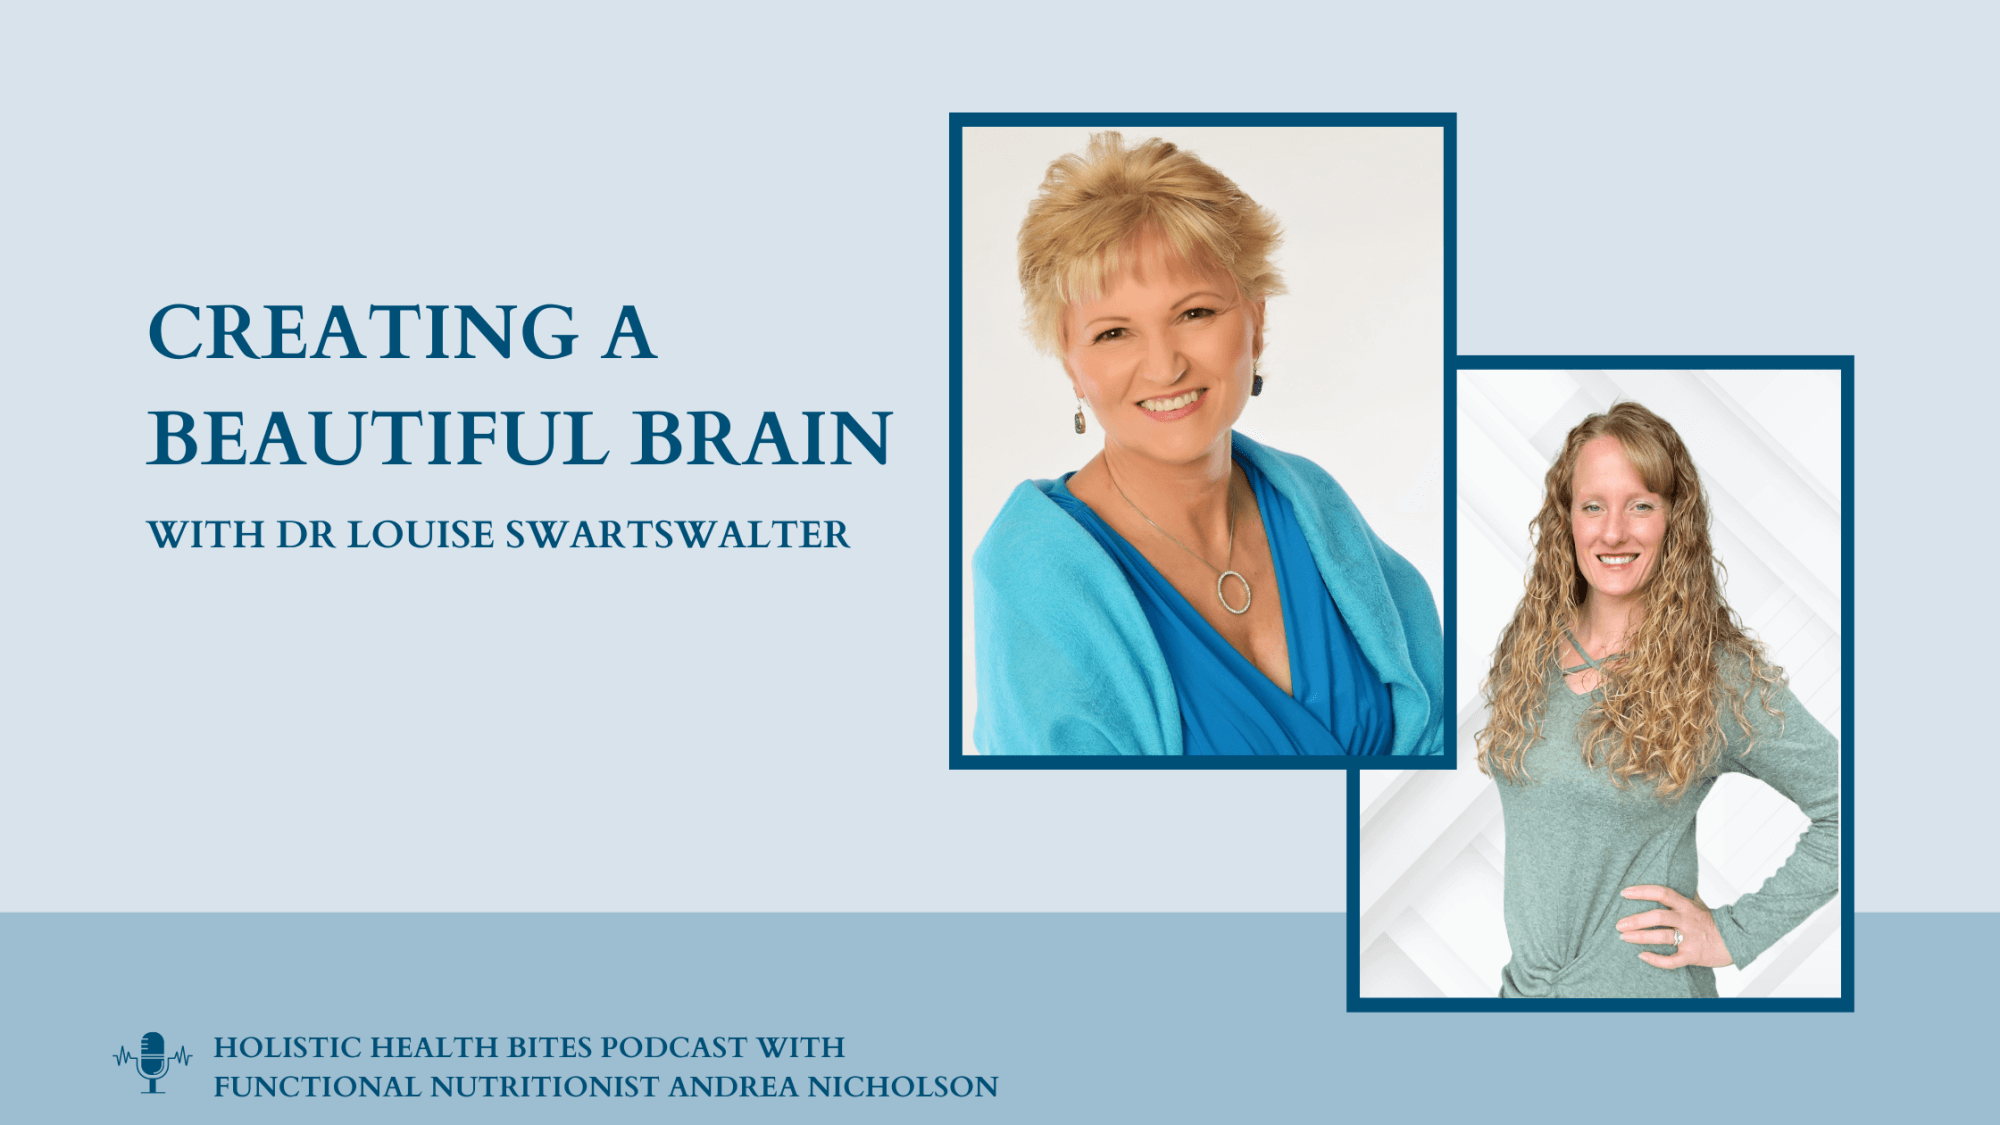 Creating a beautiful brain featuring Louise Swartswalter on the Holistic Health Bites podcast by Functional Nutritionist Andrea Nicholson